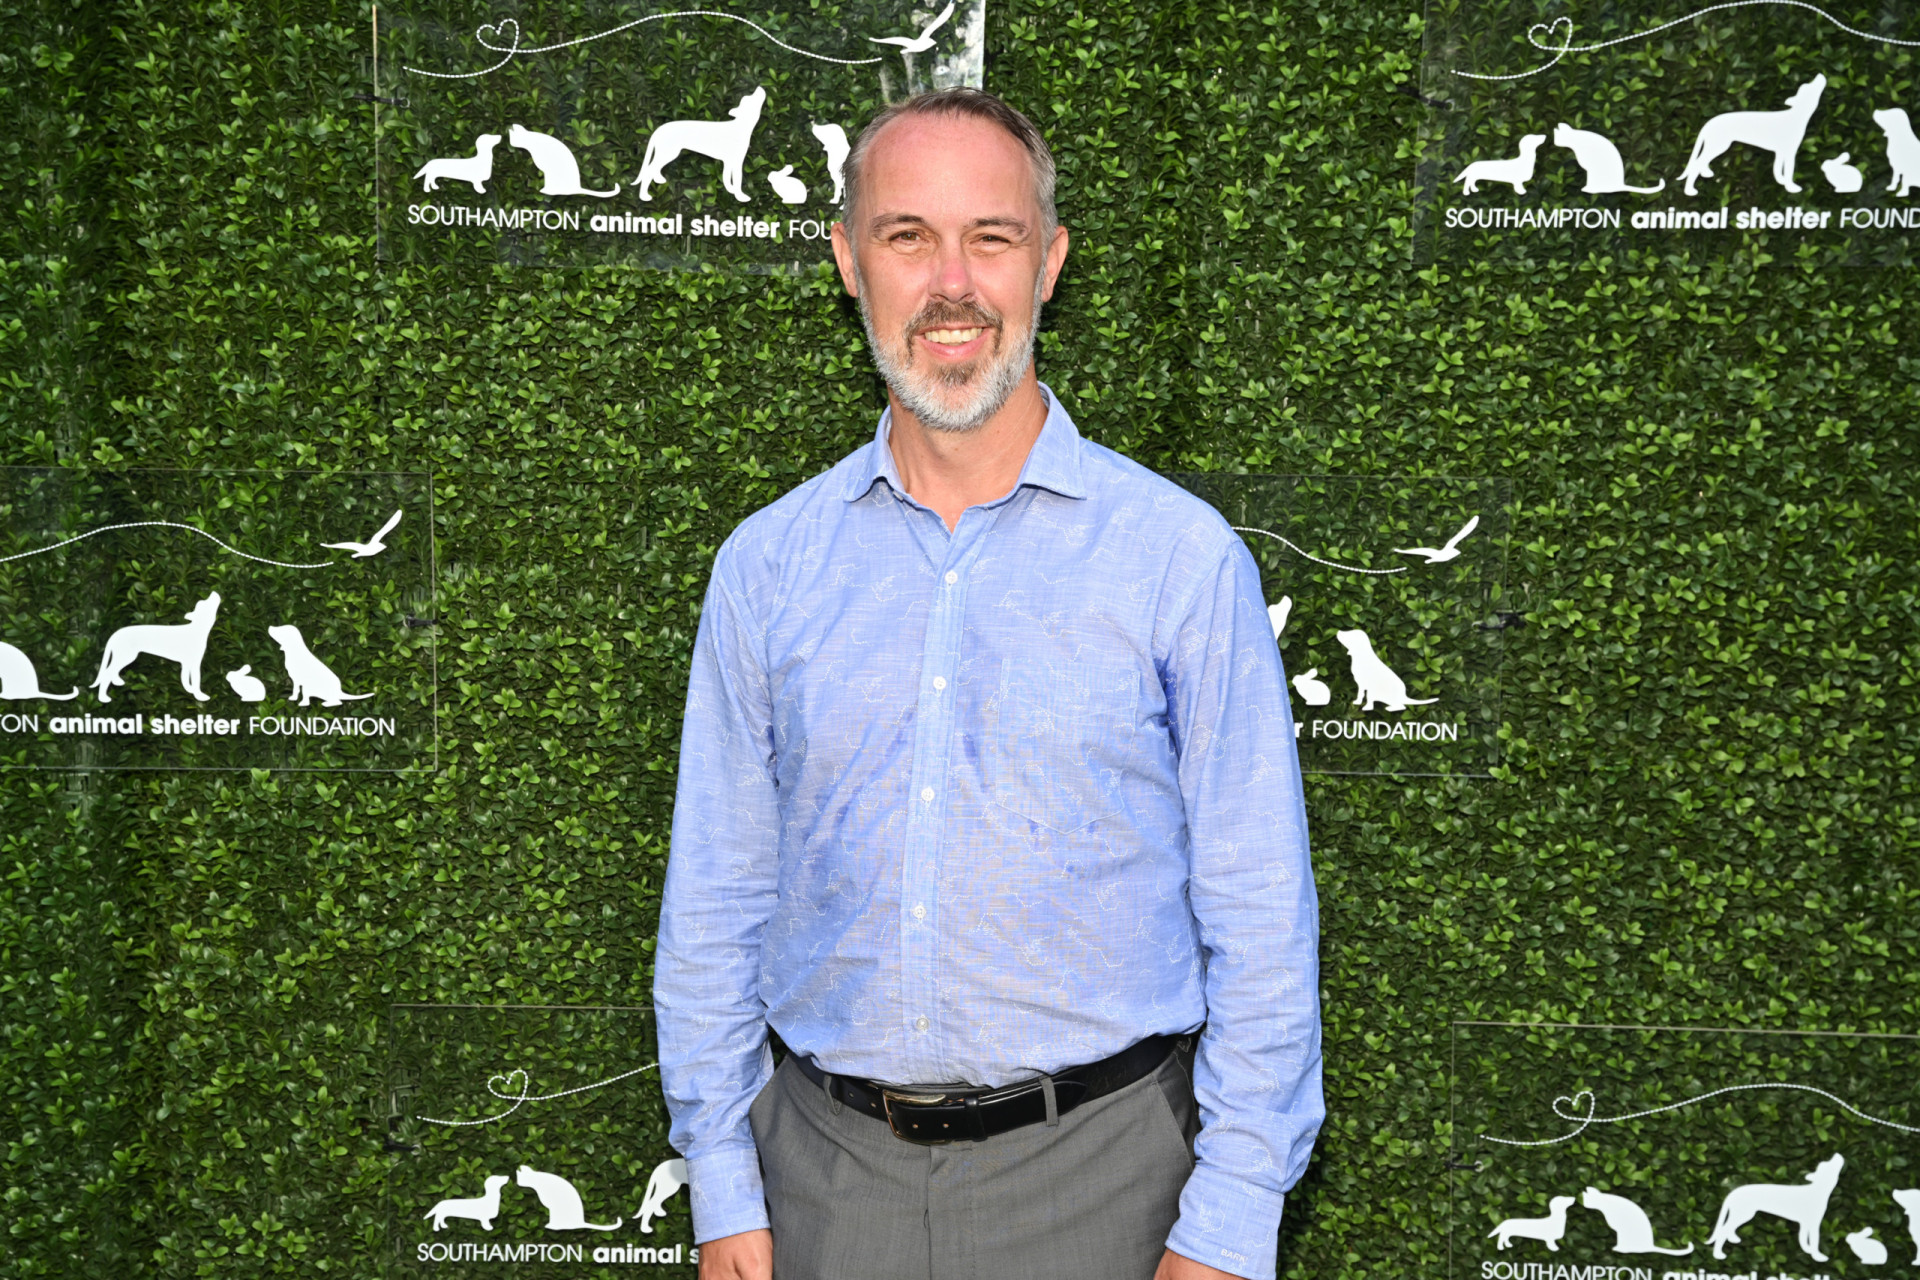 <p>Bark is a pet company founded in 2011 that sells dog food and other products. In April, the brand announced this exciting new service, much to the delight of many dog owners who love to travel. Pictured is CEO Matt Meeker. </p><p><a href="https://www.msn.com/en-us/community/channel/vid-7xx8mnucu55yw63we9va2gwr7uihbxwc68fxqp25x6tg4ftibpra?cvid=94631541bc0f4f89bfd59158d696ad7e">Follow us and access great exclusive content every day</a></p>